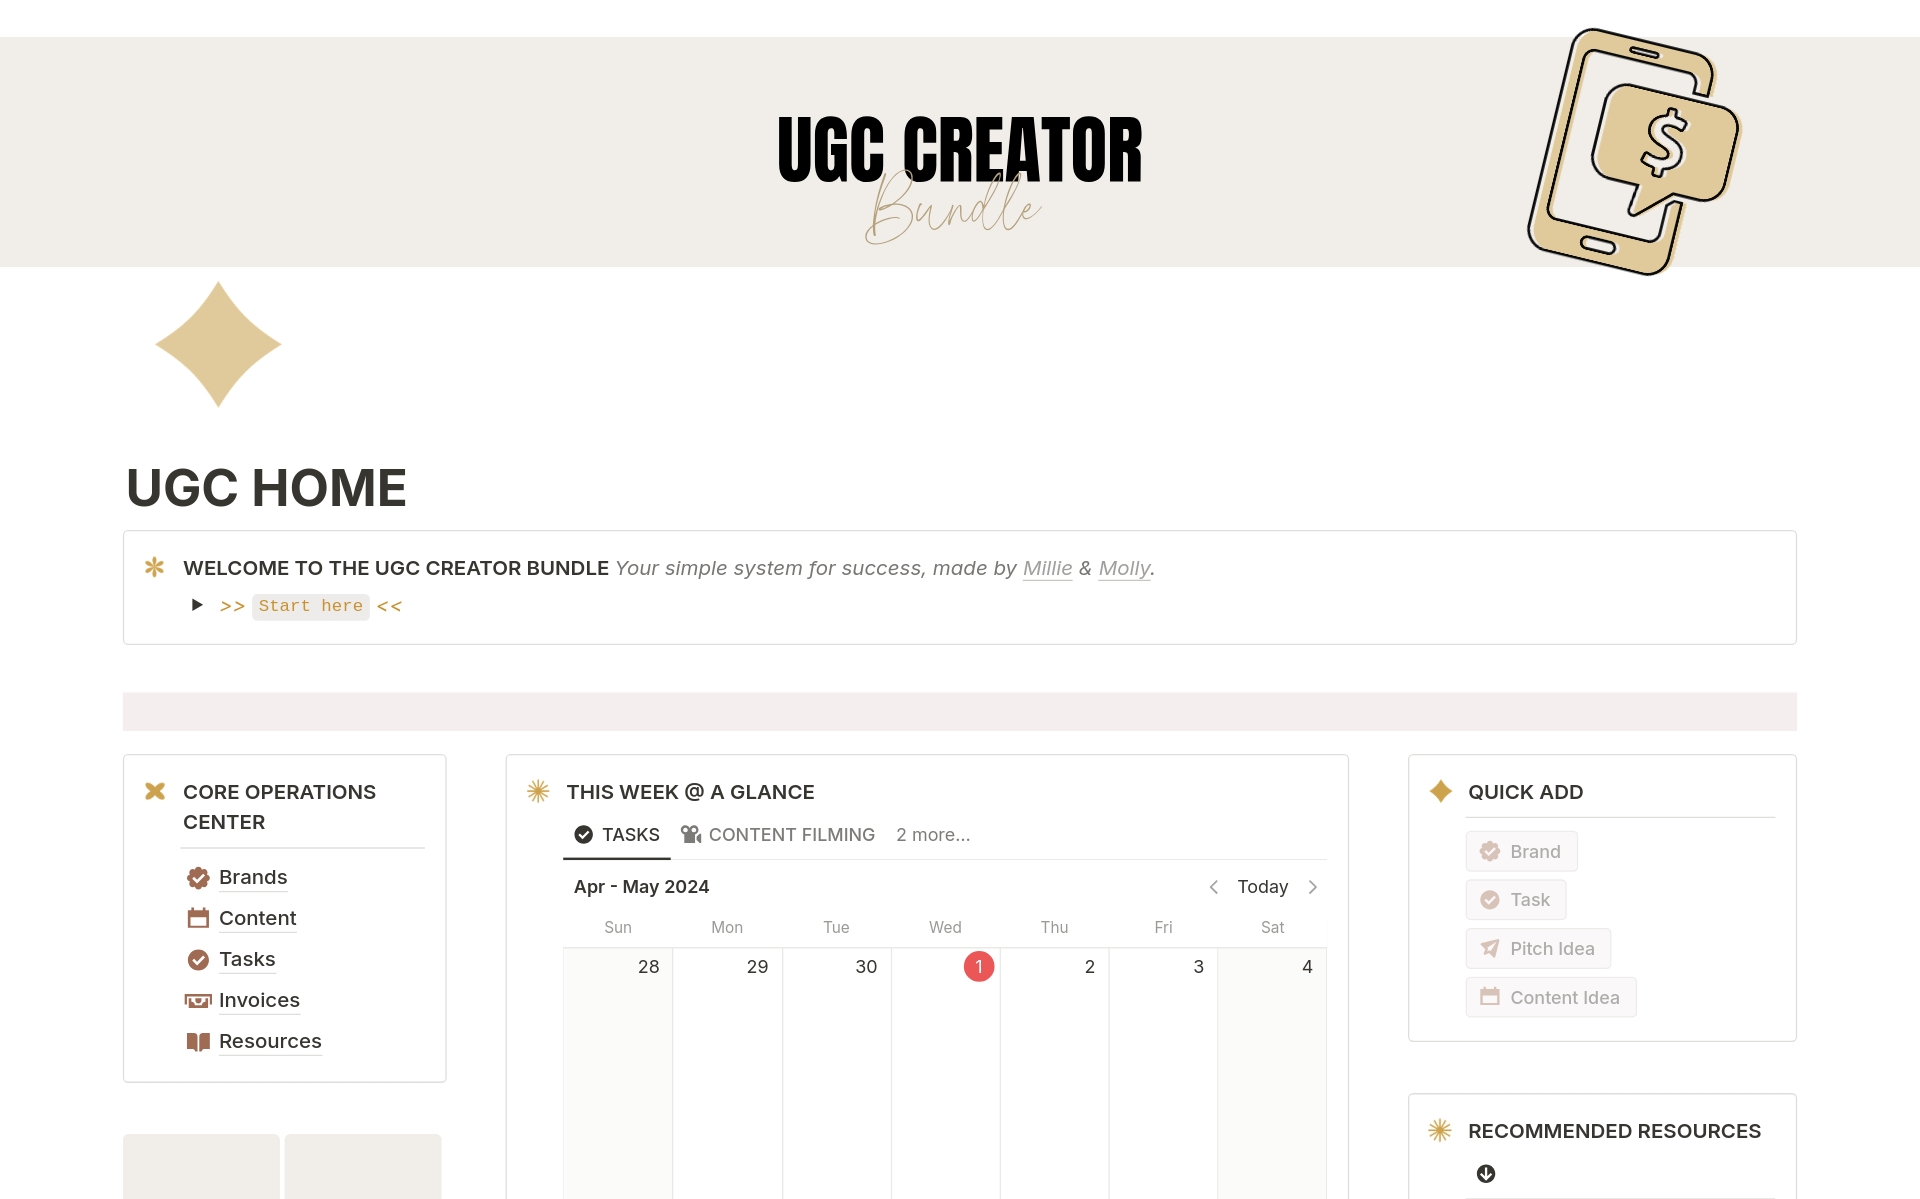 The UGC Creator Bundle is built for independent creators to manage all aspects of their UGC business. Whether you are just starting out, or a seasoned expert, this bundle combines the knowledge of two experts in their field created by Notion Certified Consultant, Molly Jones